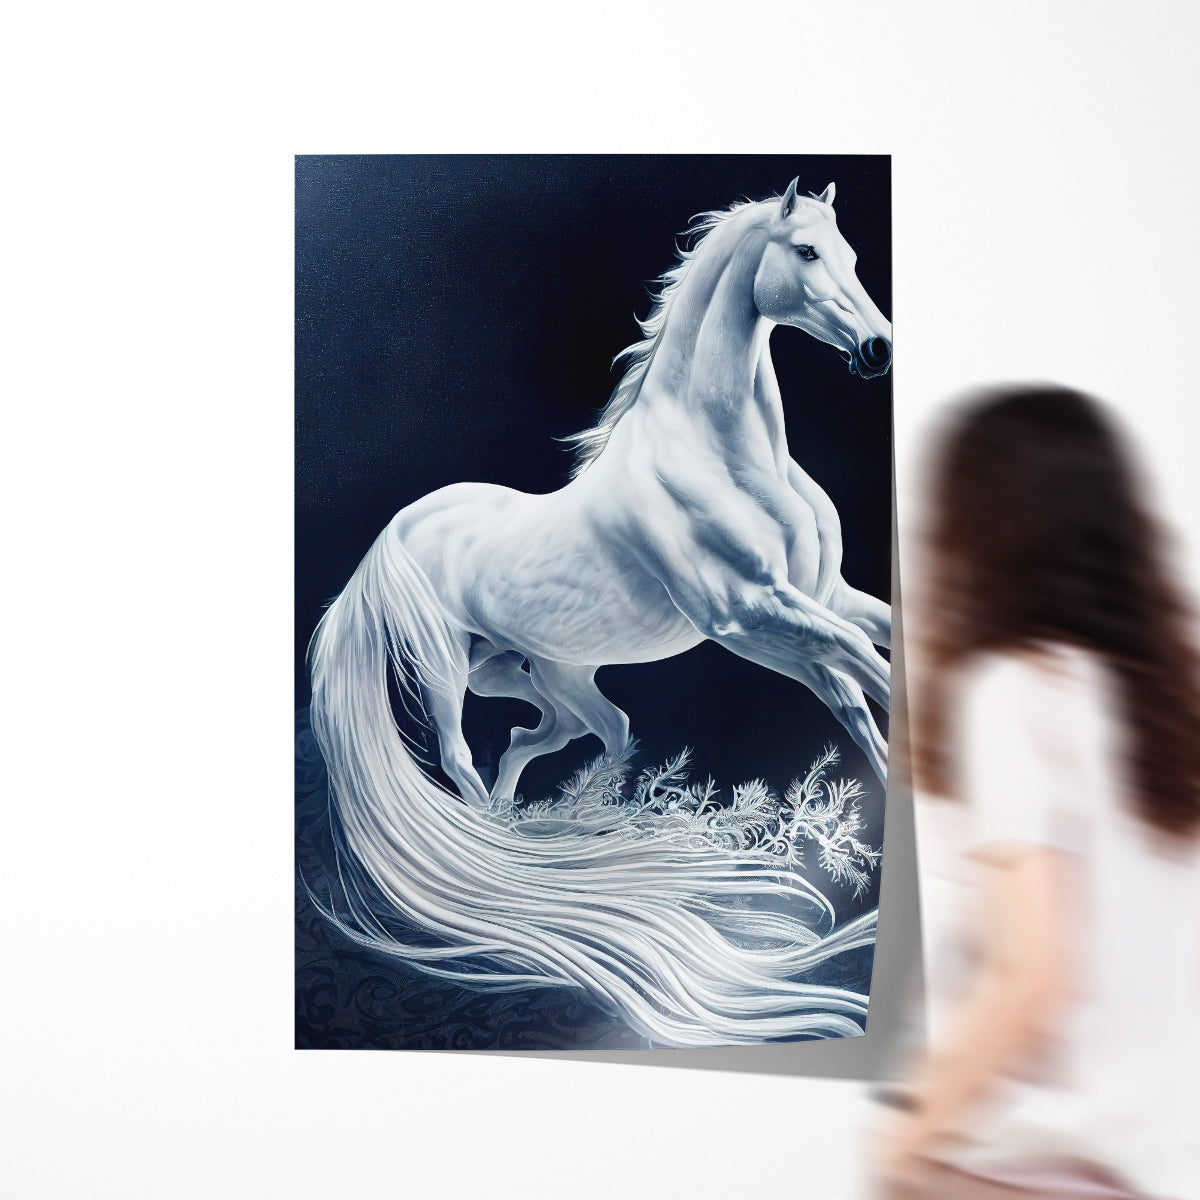 Beautiful White Horse Posters For Office And Home Decor-Vertical Posters NOT FRAMED-CetArt-8″x10″ inches-CetArt